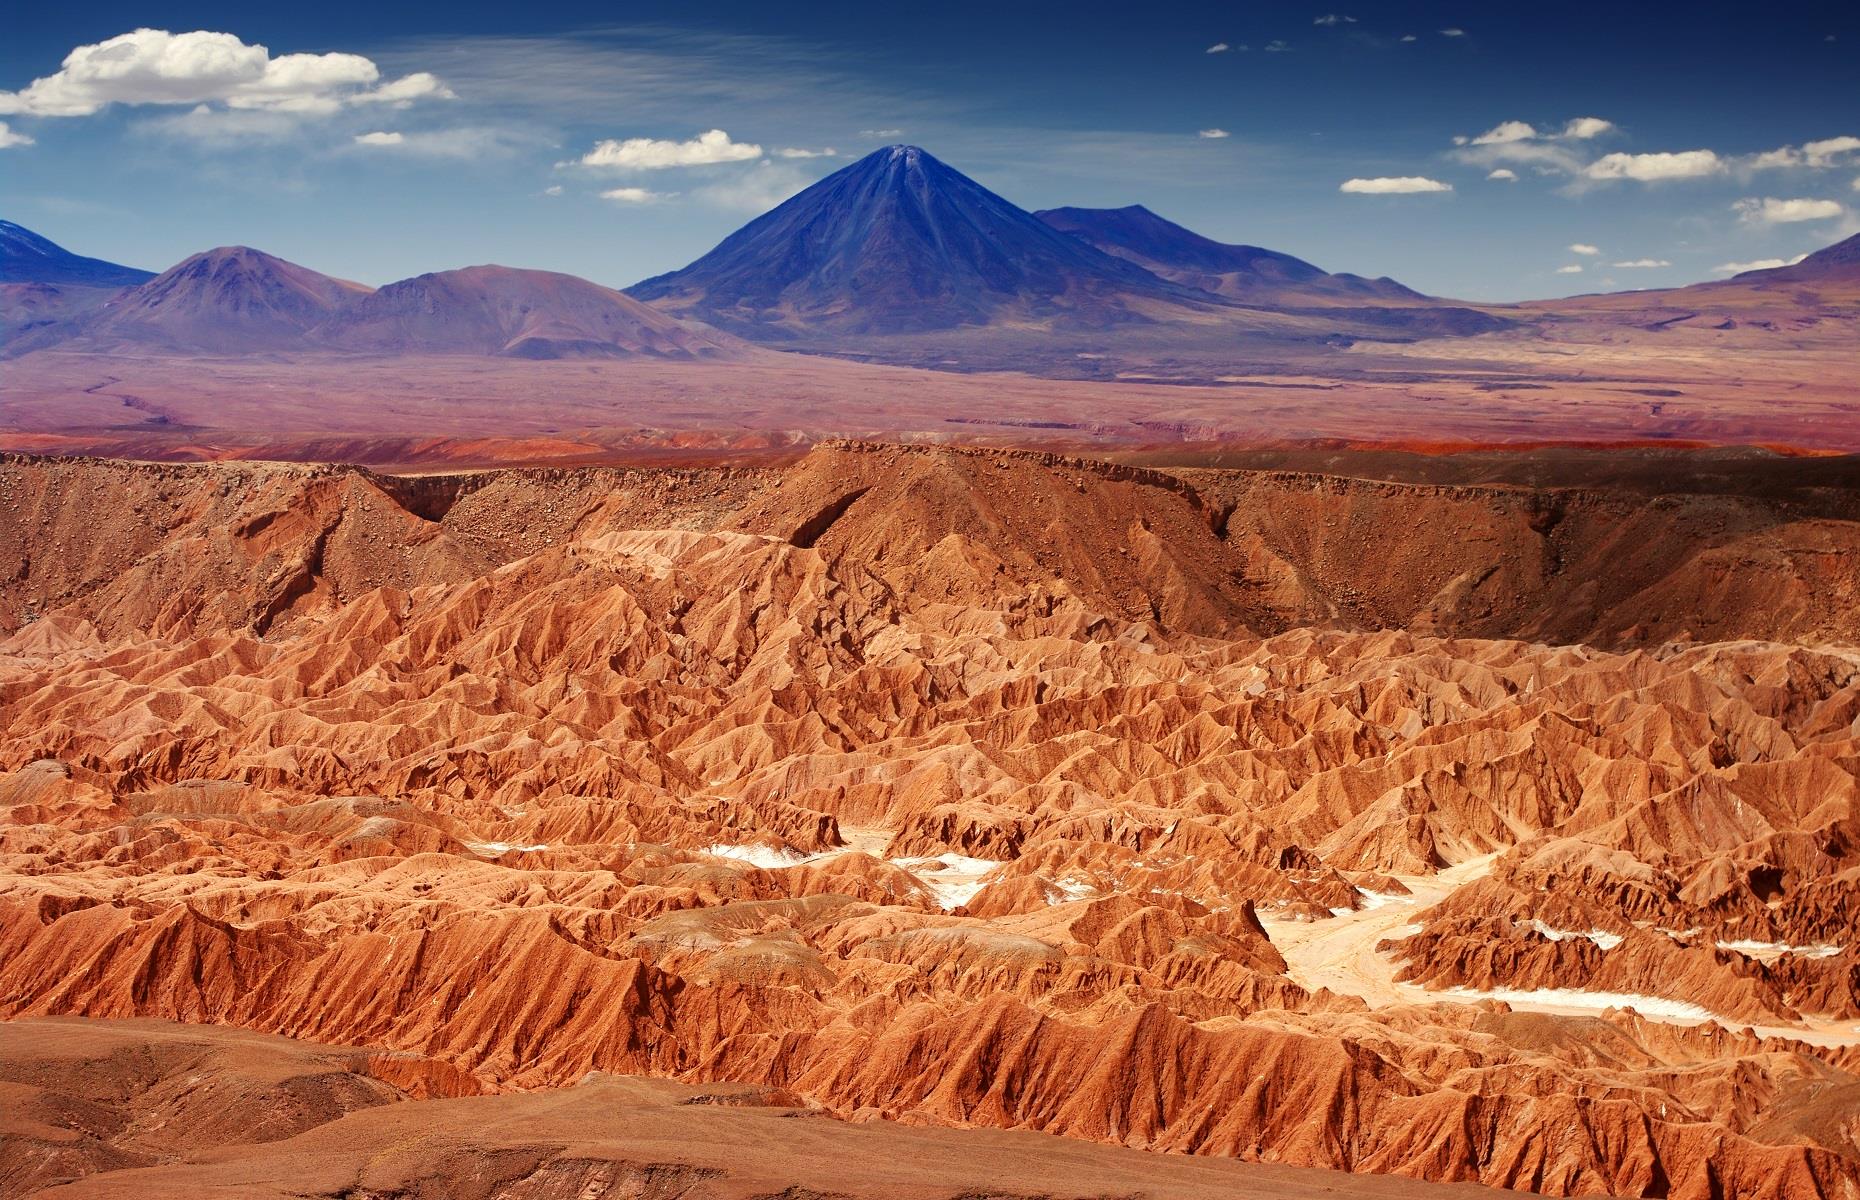 <p>Covering an area of almost 40,540 square miles (105,000sq km), the Atacama Desert is beautiful and vast in equal measure. From the Valley of the Moon, with its unique rocky ridges, to the Atacama Salt Flat, this spectacular plateau is a travel essential. Many directors seem to agree, because Chile's renowned desert has been captured in 50 different movies and documentaries, including <em>Spy Kids</em> and the James Bond franchise instalment <em>Quantum of Solace</em>.</p>